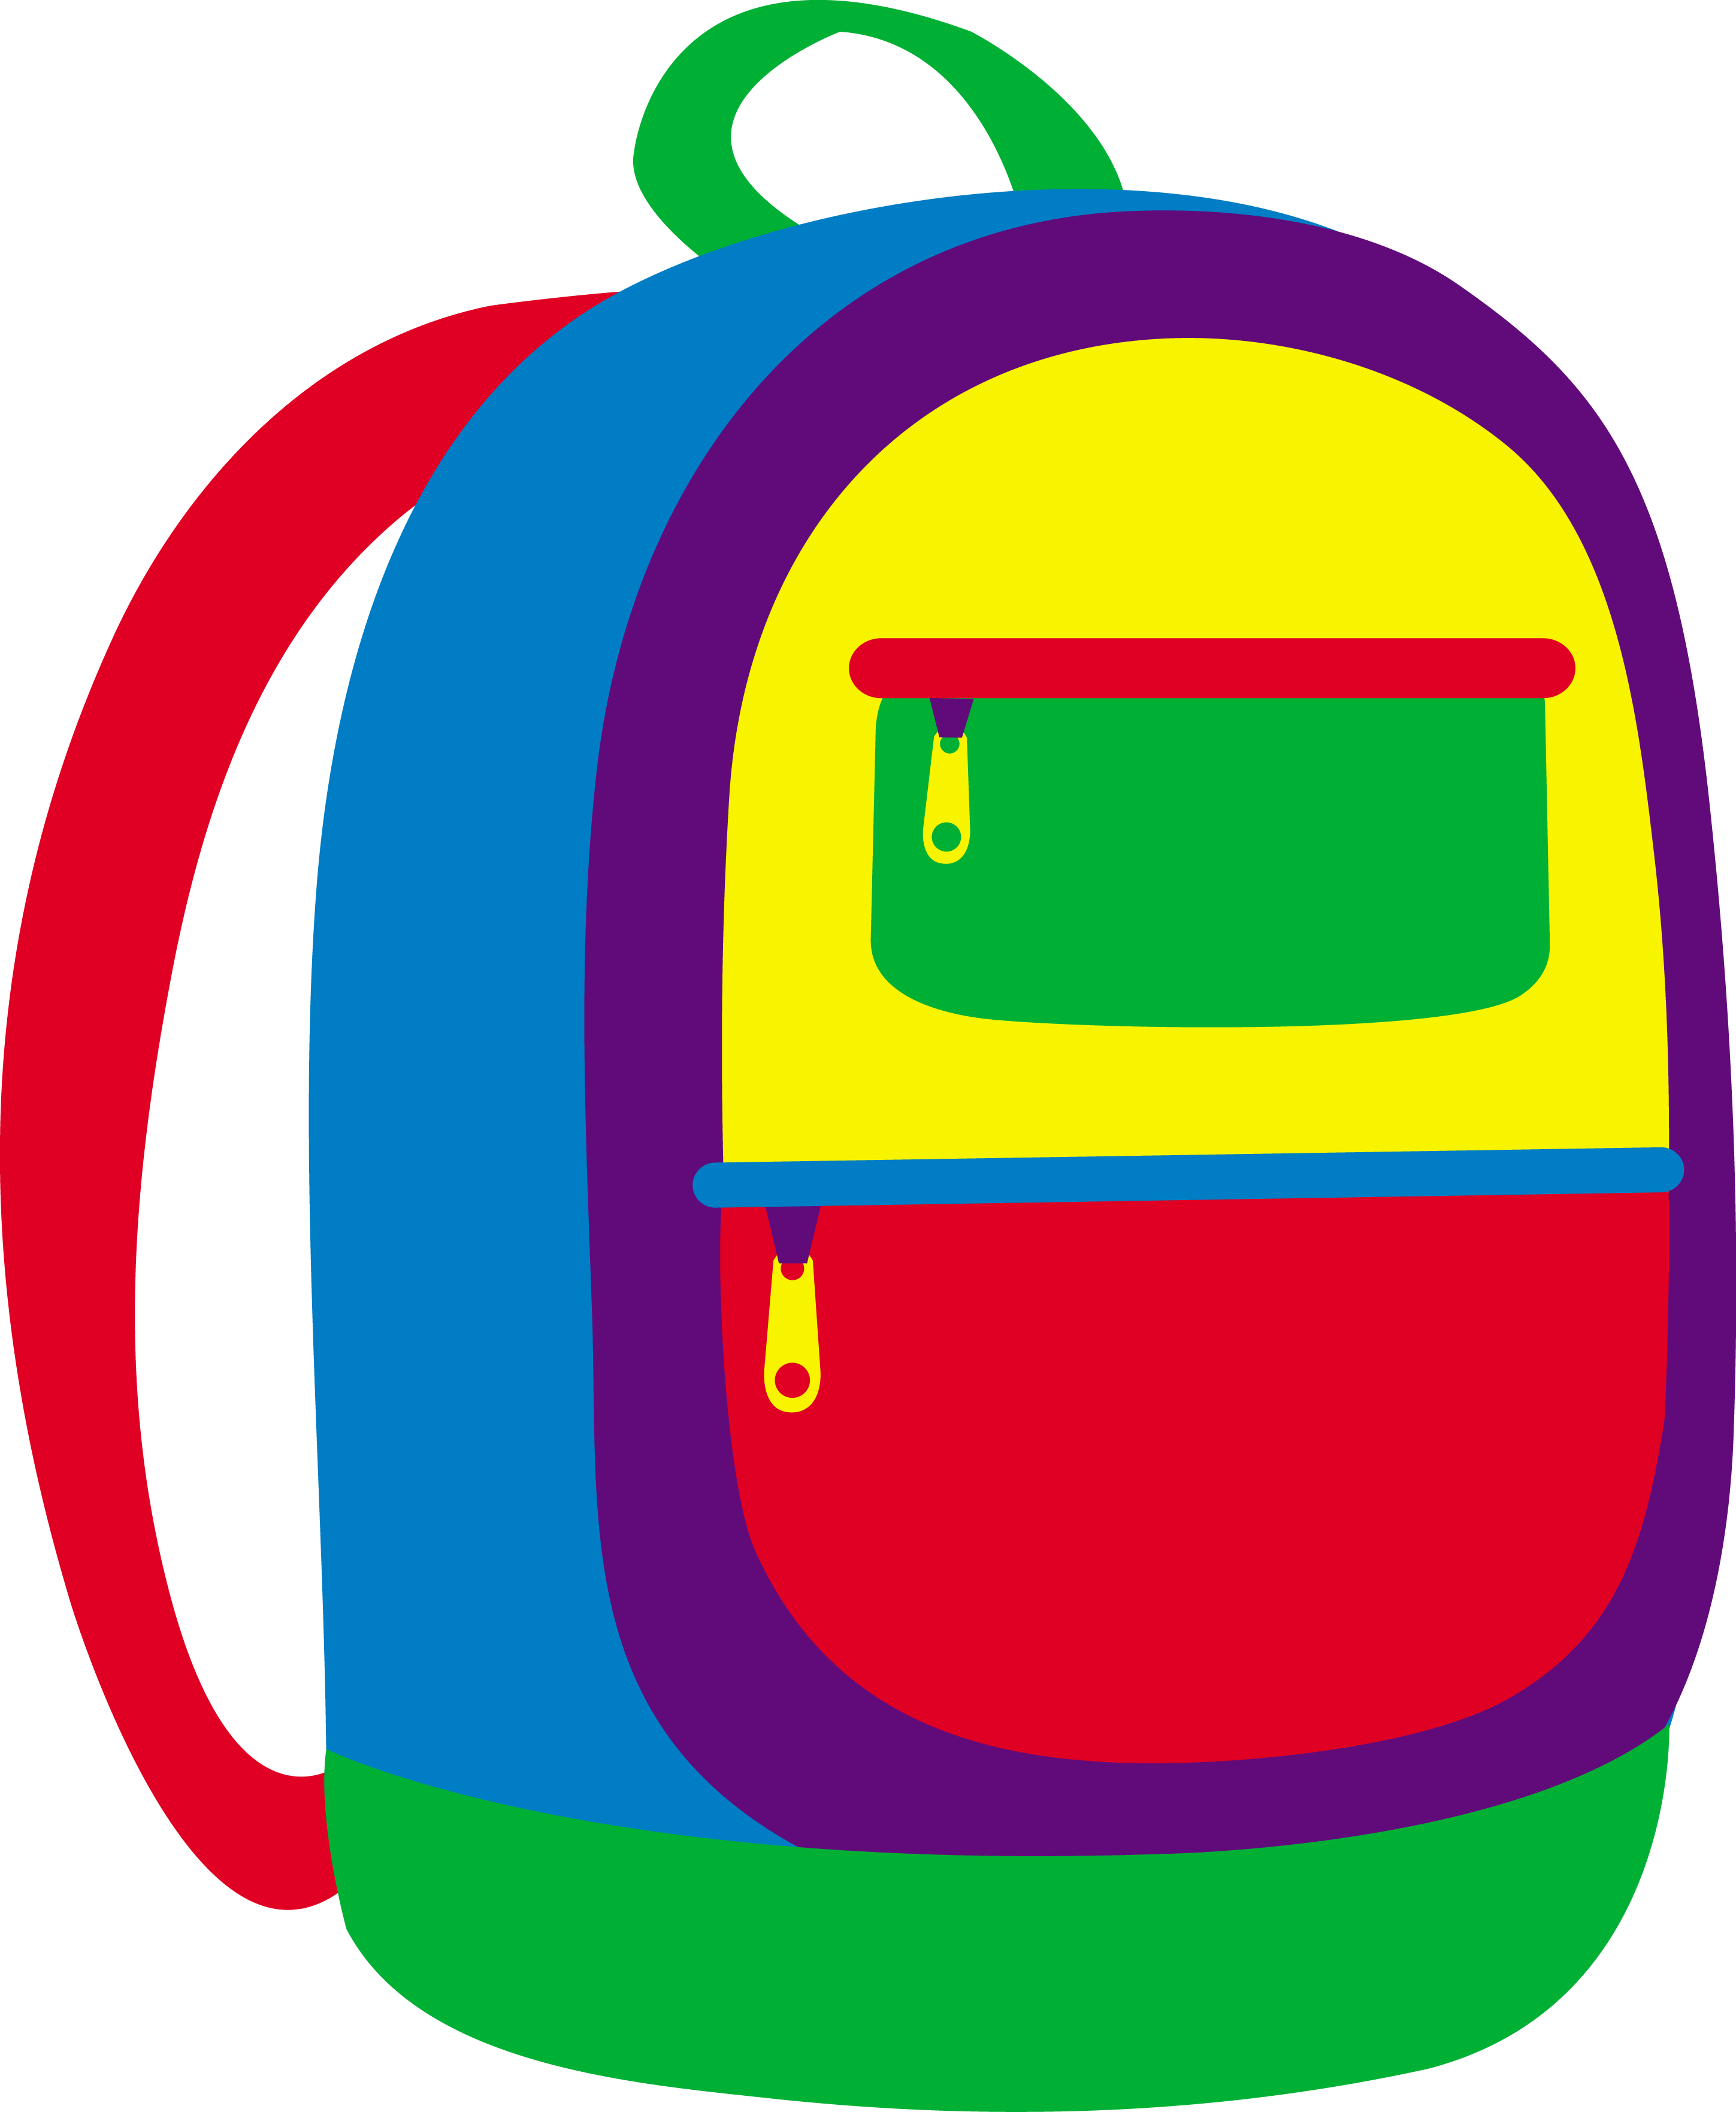 Backpack Cliparts | Back to School Bag Clip Arts | Colorful Backpacks Clip  Arts